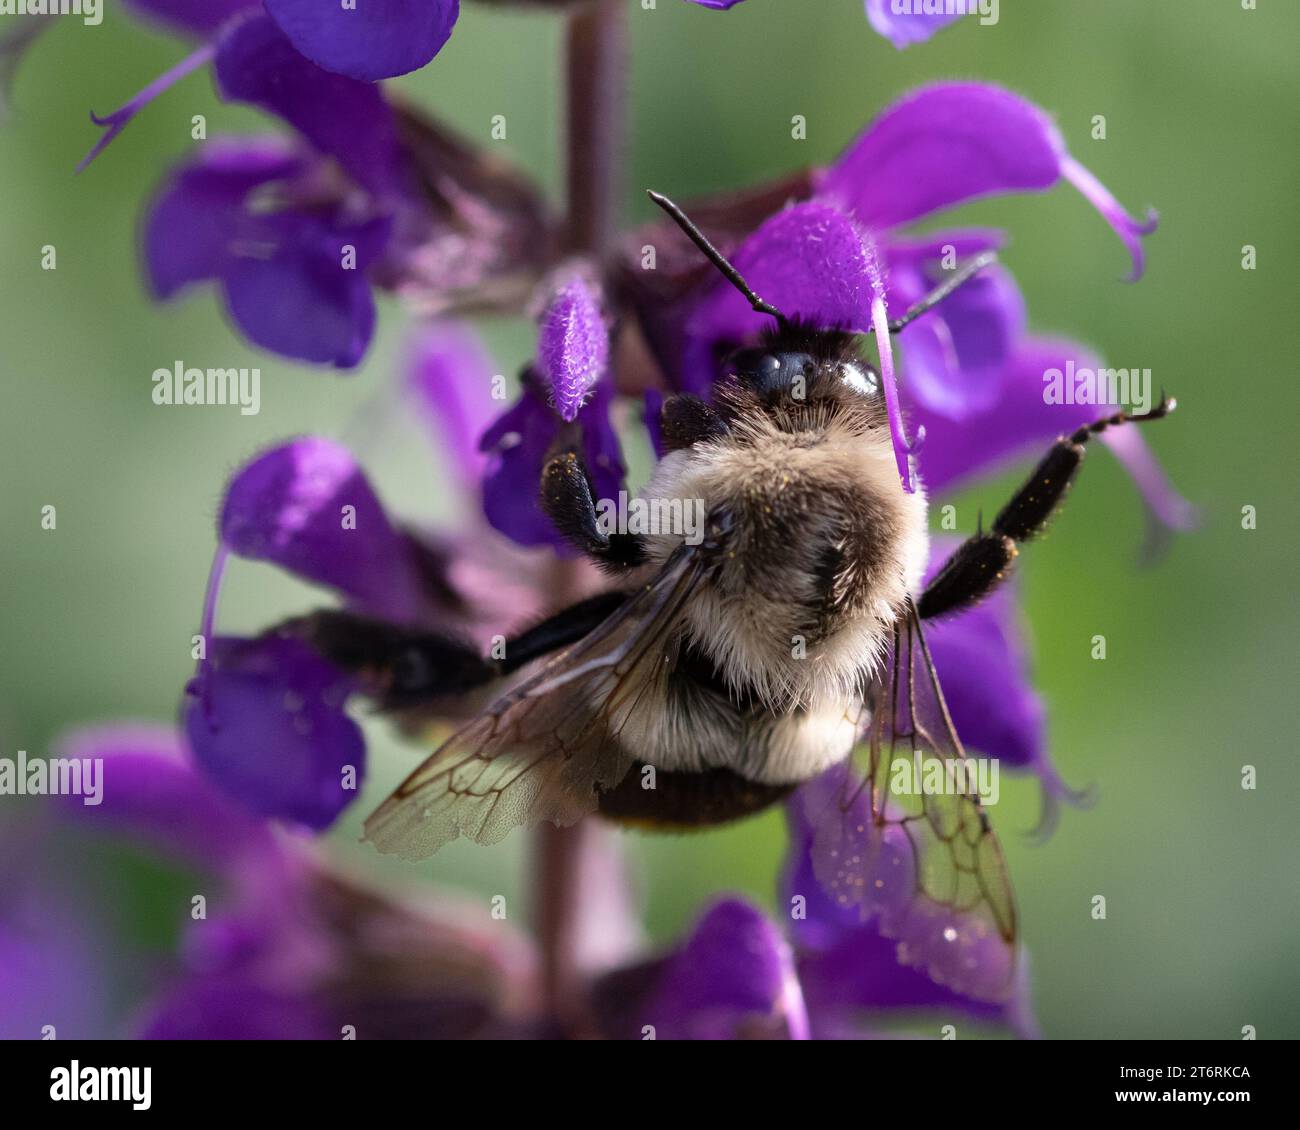 A carpenter bee on purple catmint against a green background Stock Photo